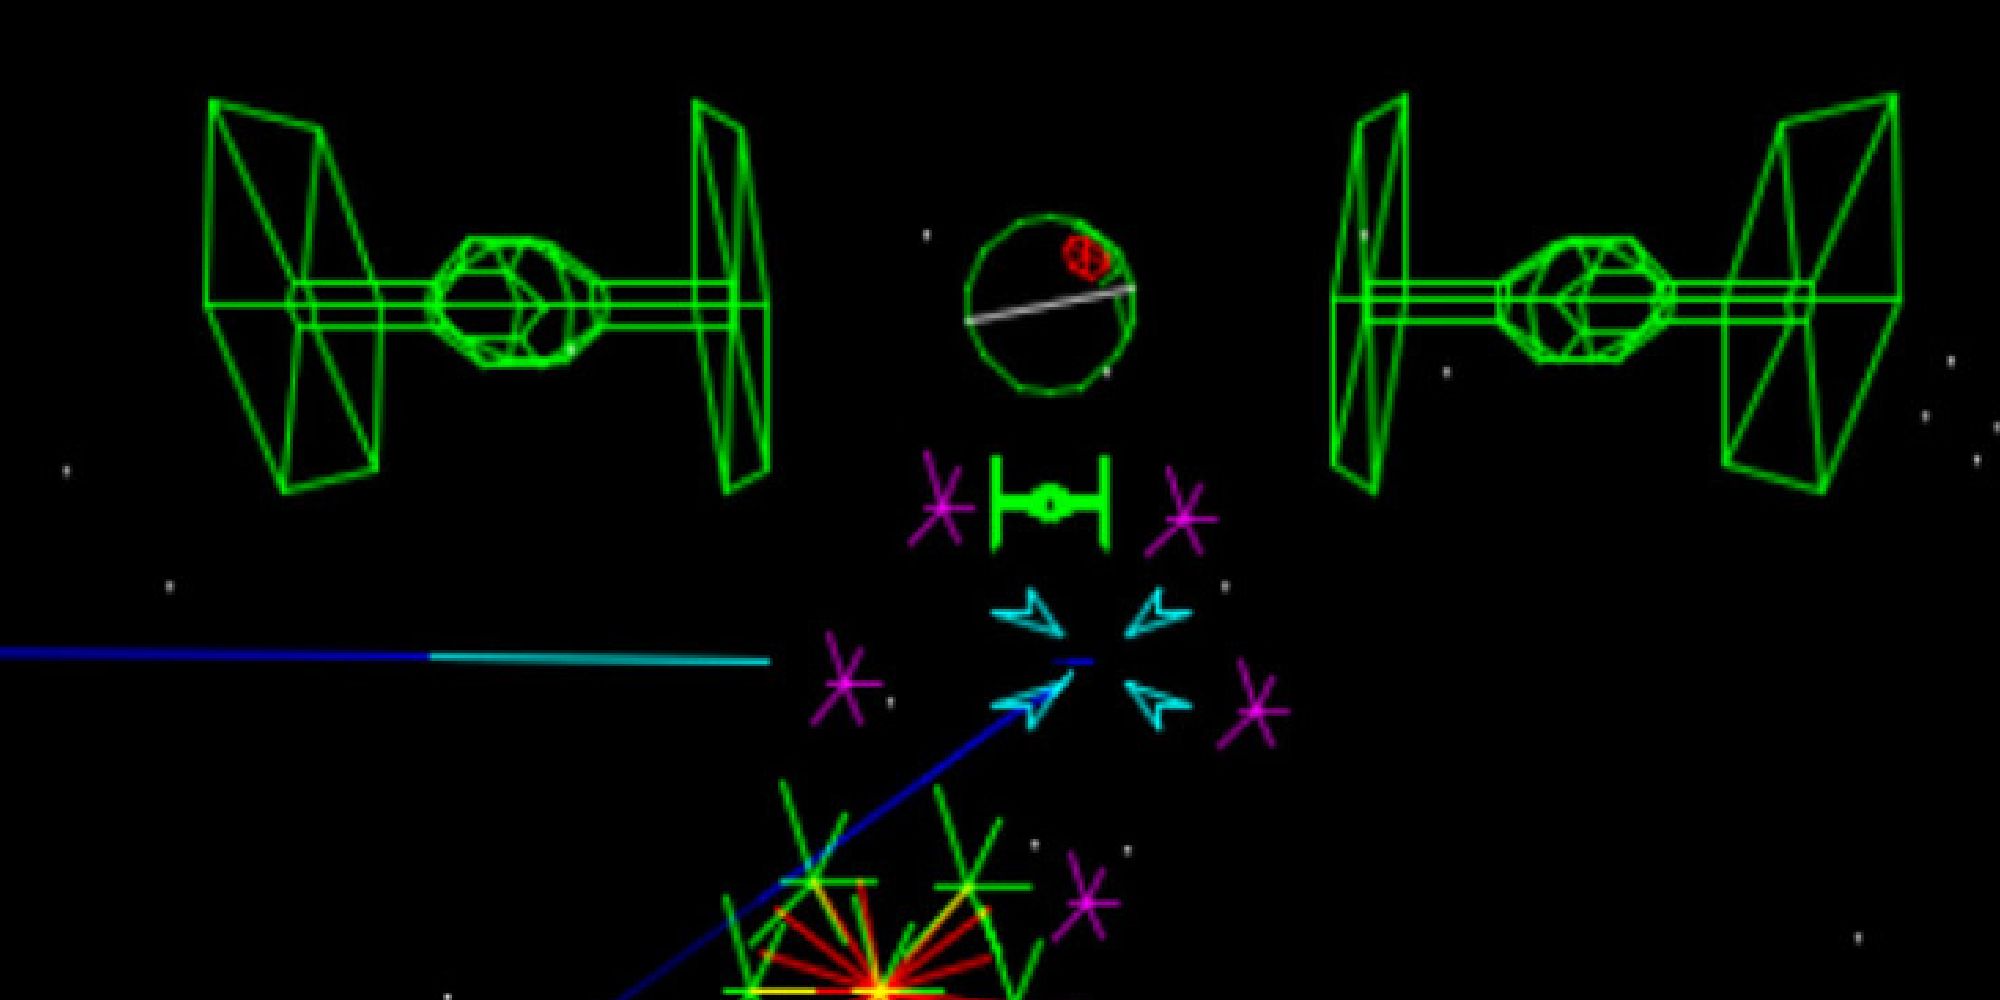 TIE Fighters targeting an X-wing in the Star Wars arcade game